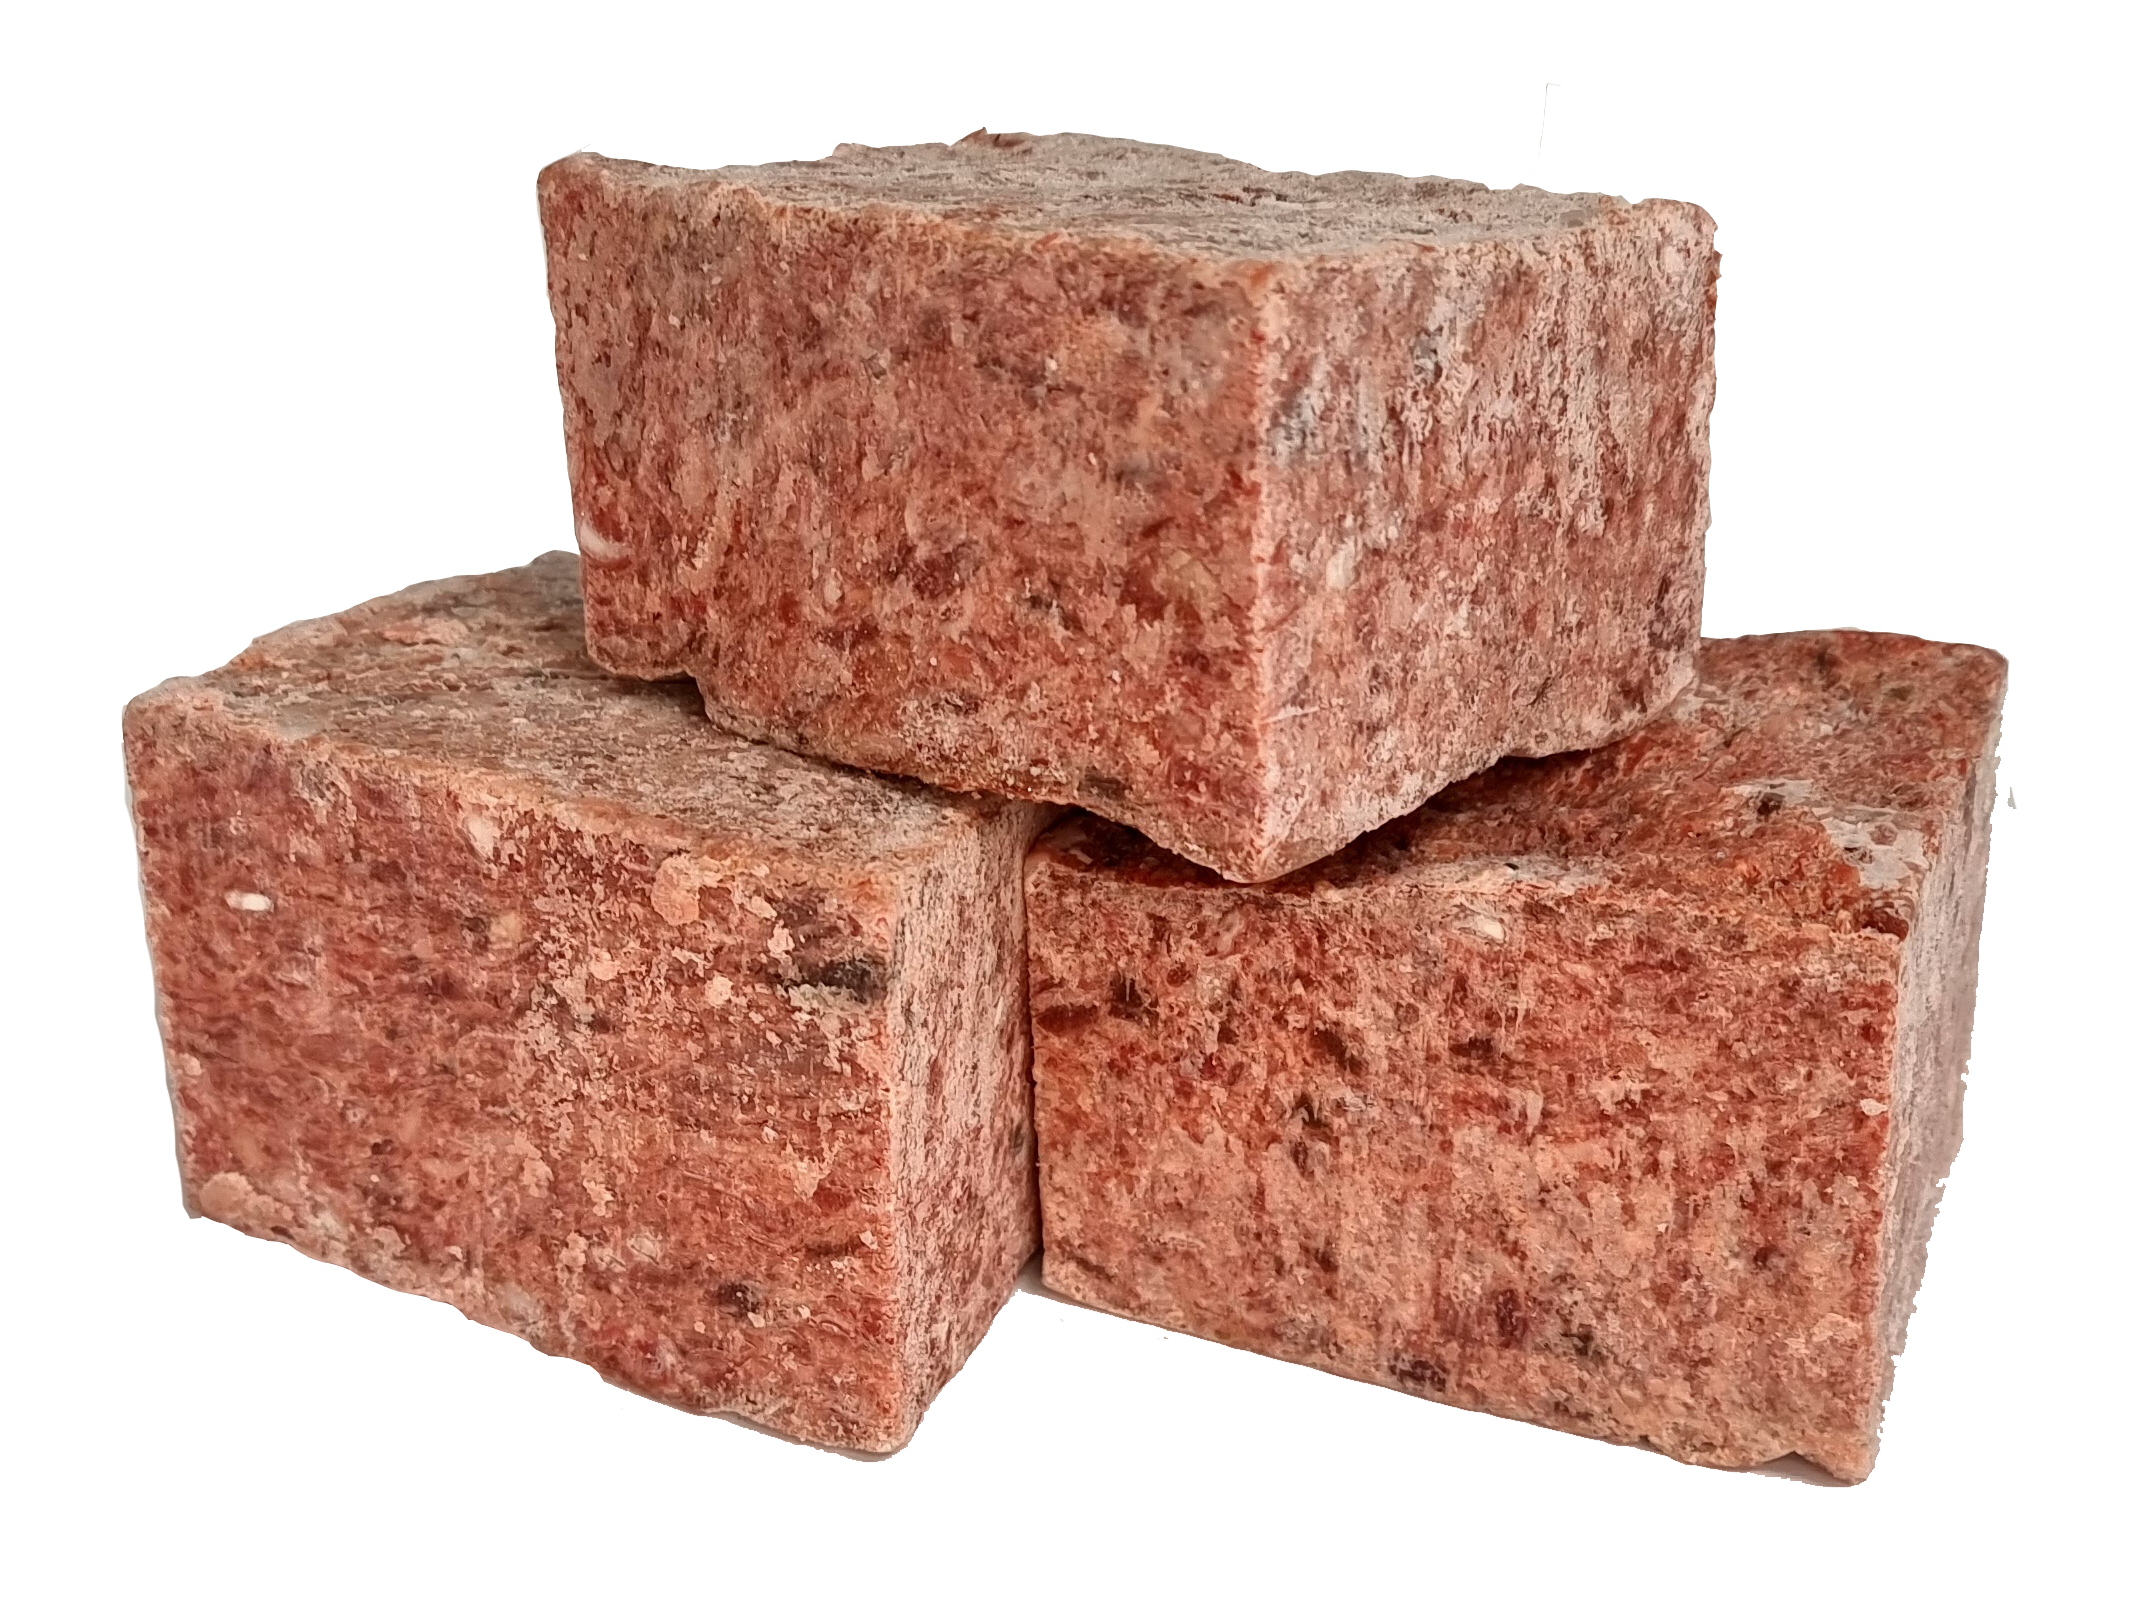 Beef & Chicken COMPLETE 5kgs (11lb) 10 x approx 500g blocks suitable for Cats